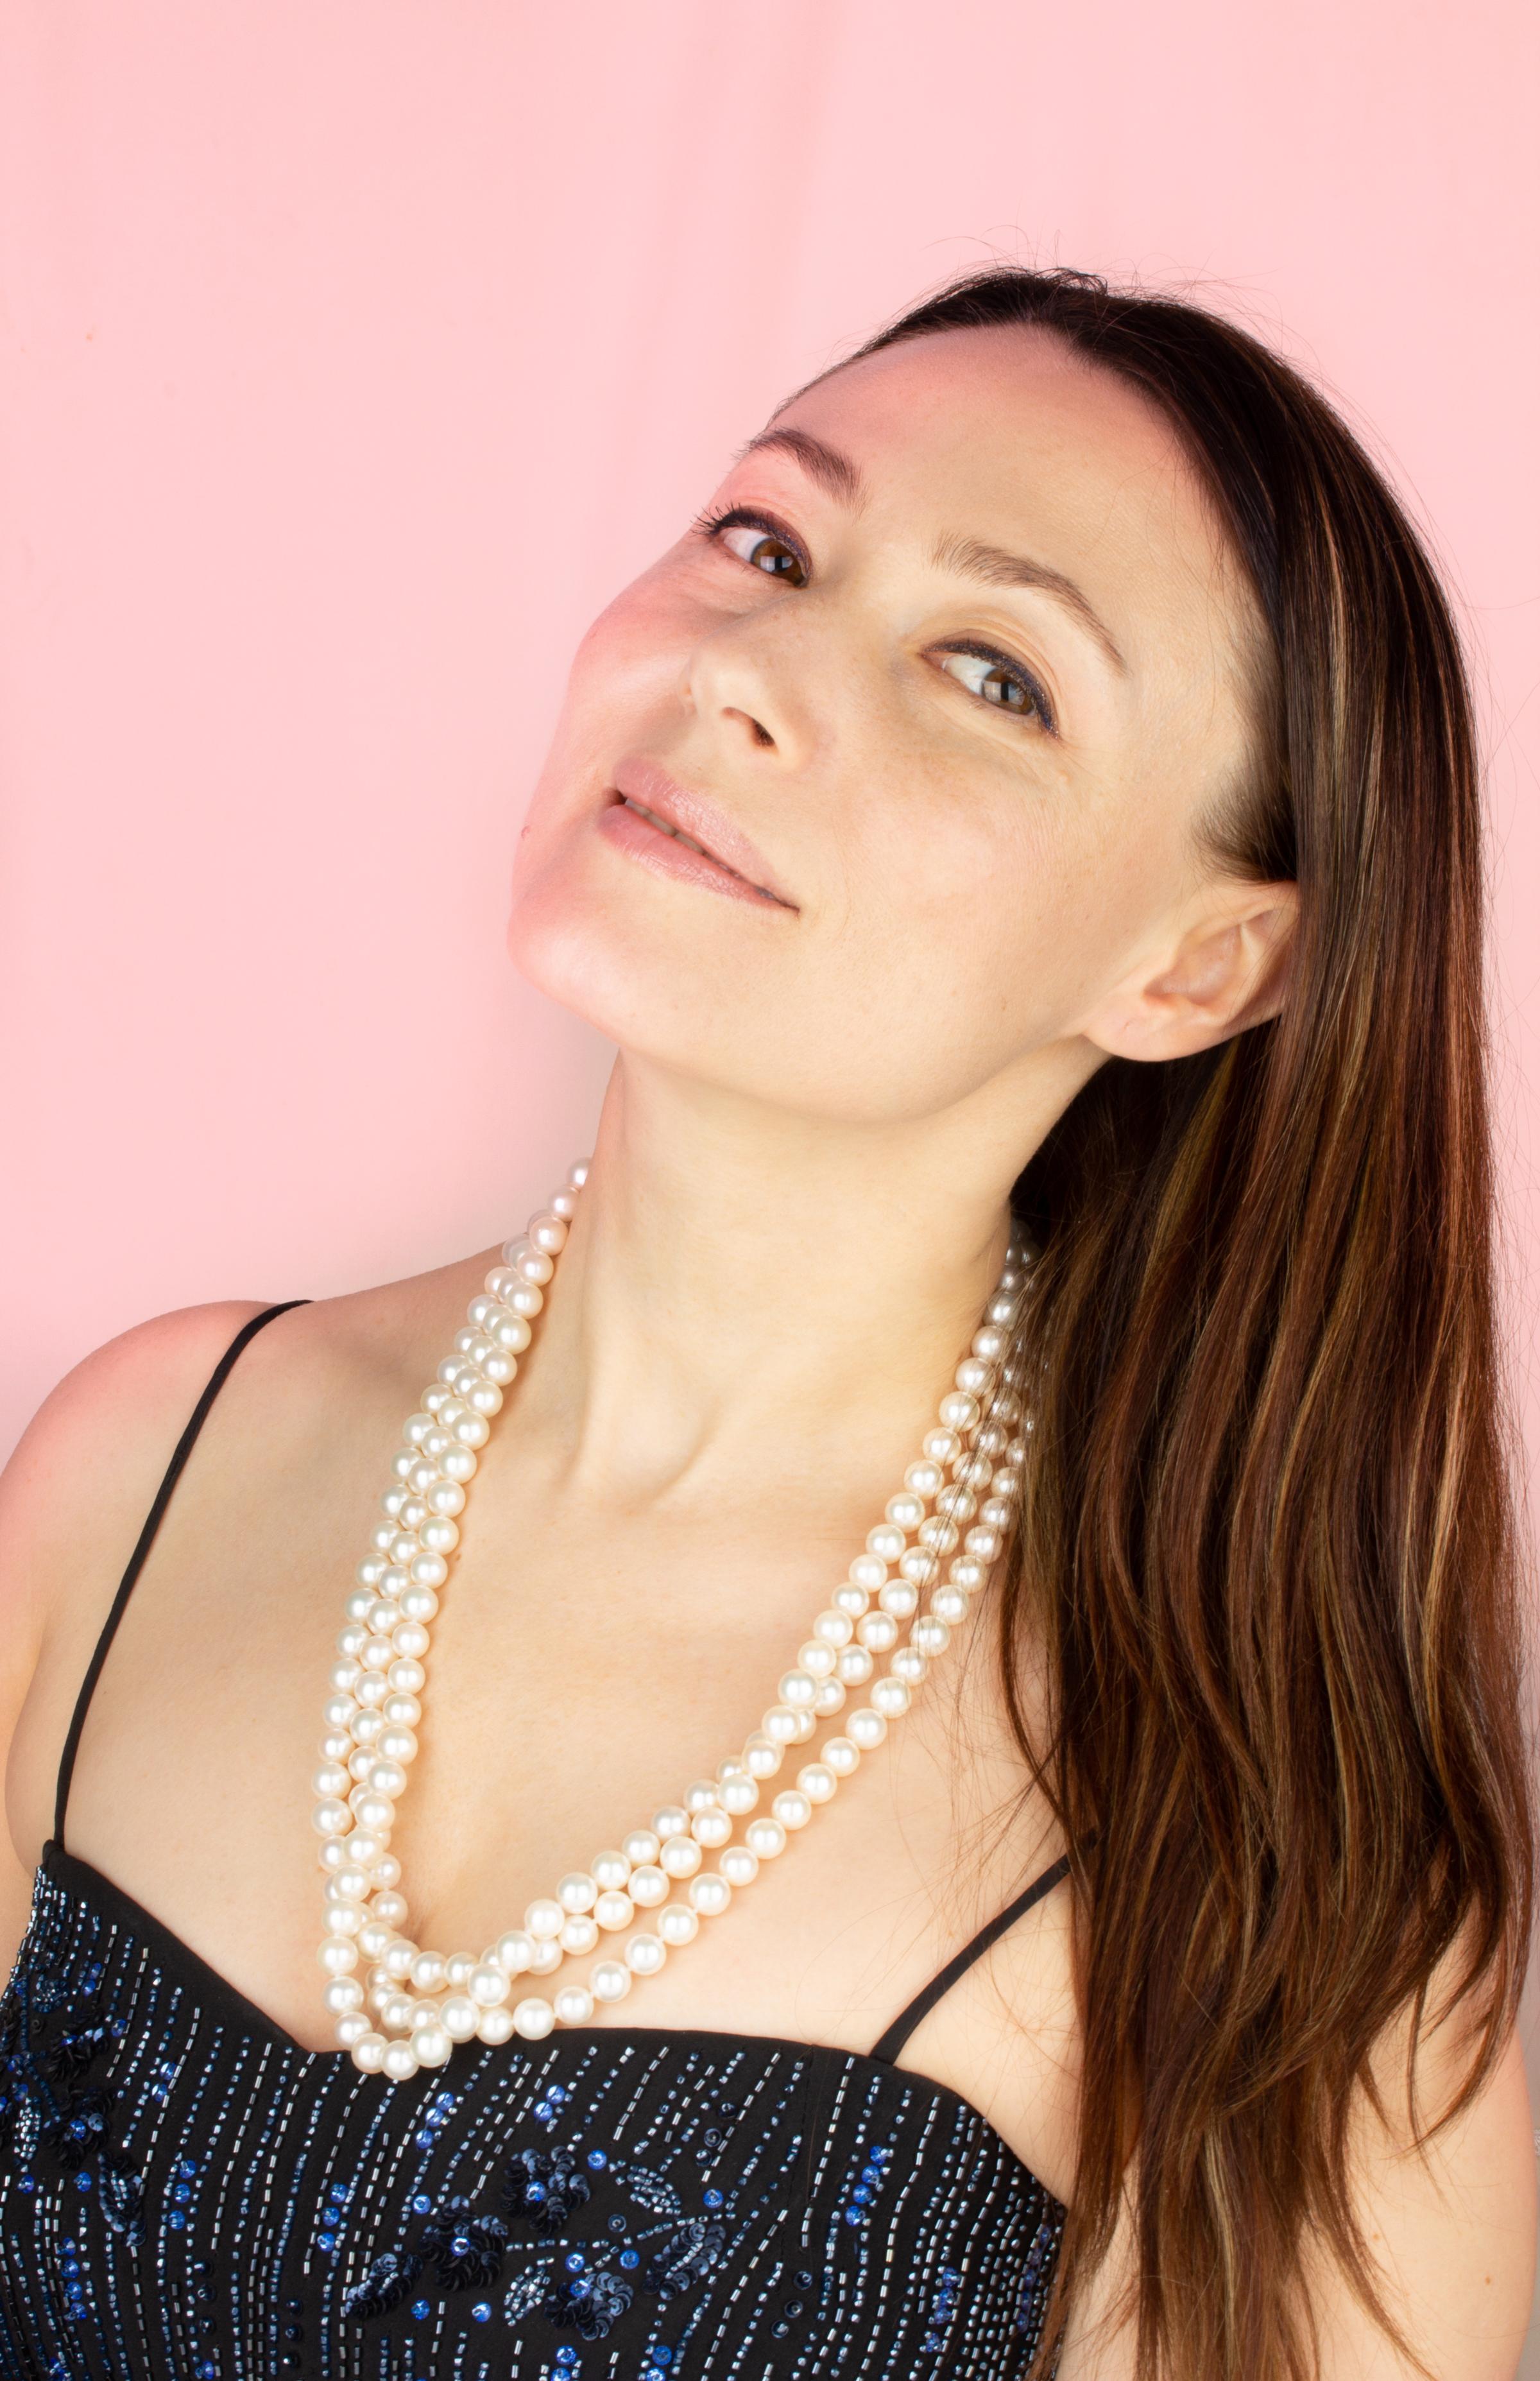 The 75” Japanese Akoya pearl necklace consists of 205 round pearls (Pinctada Fucata) of 8.5/9mm diameter. The pearls display a lovely nacre, lustre, and iridescence. The necklace is held together by a handmade 18 carat white gold clasp decorated